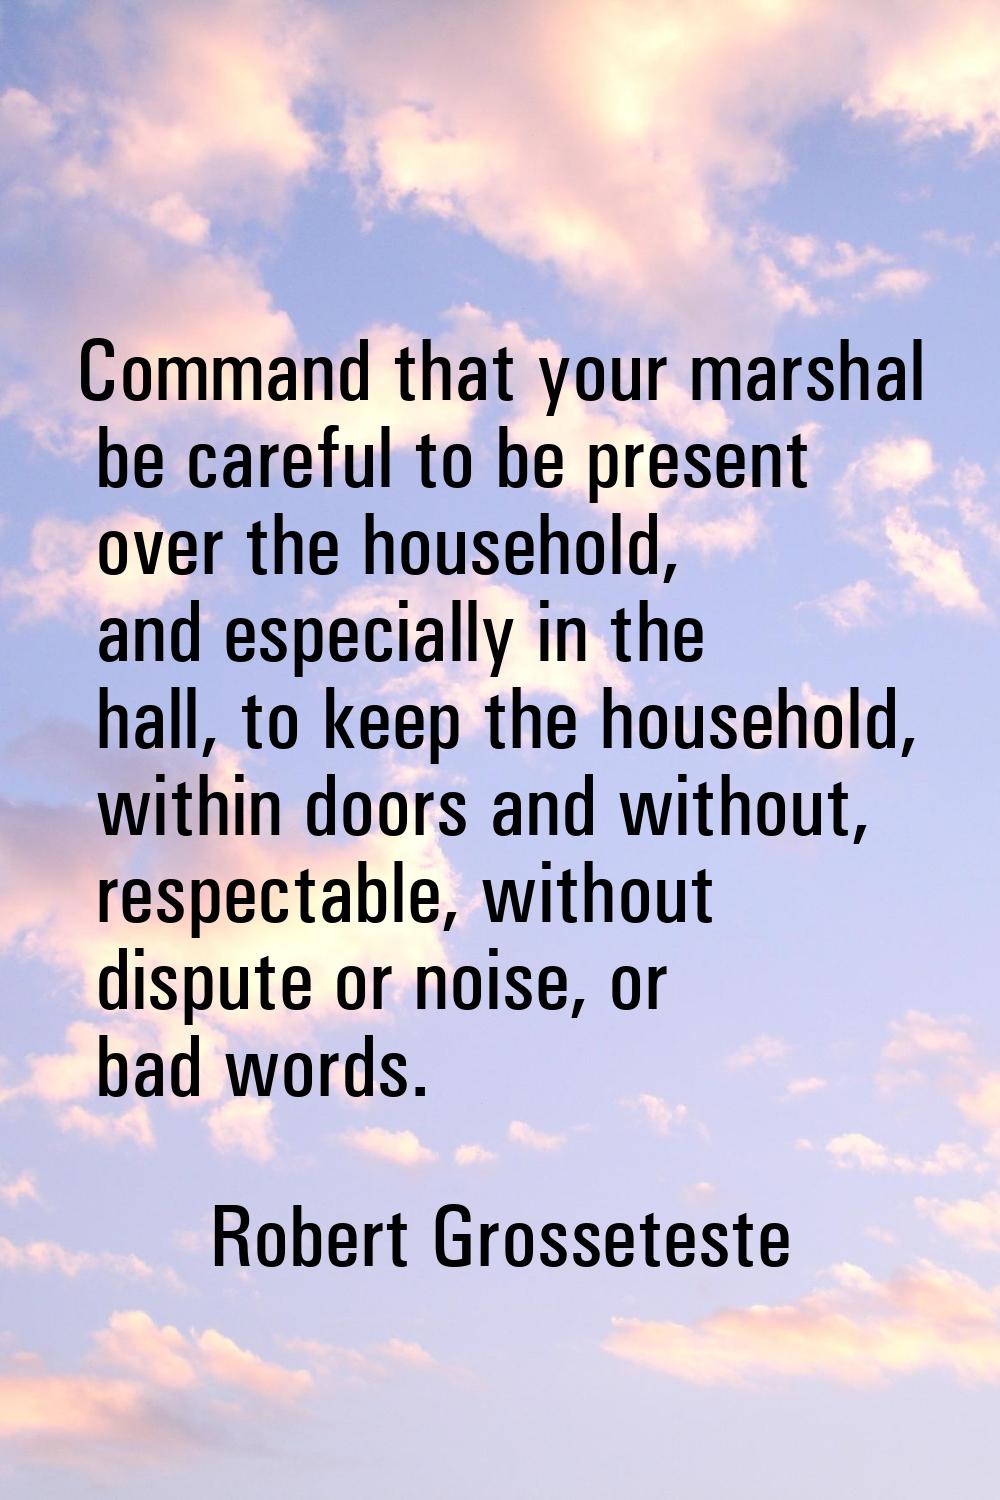 Command that your marshal be careful to be present over the household, and especially in the hall, 